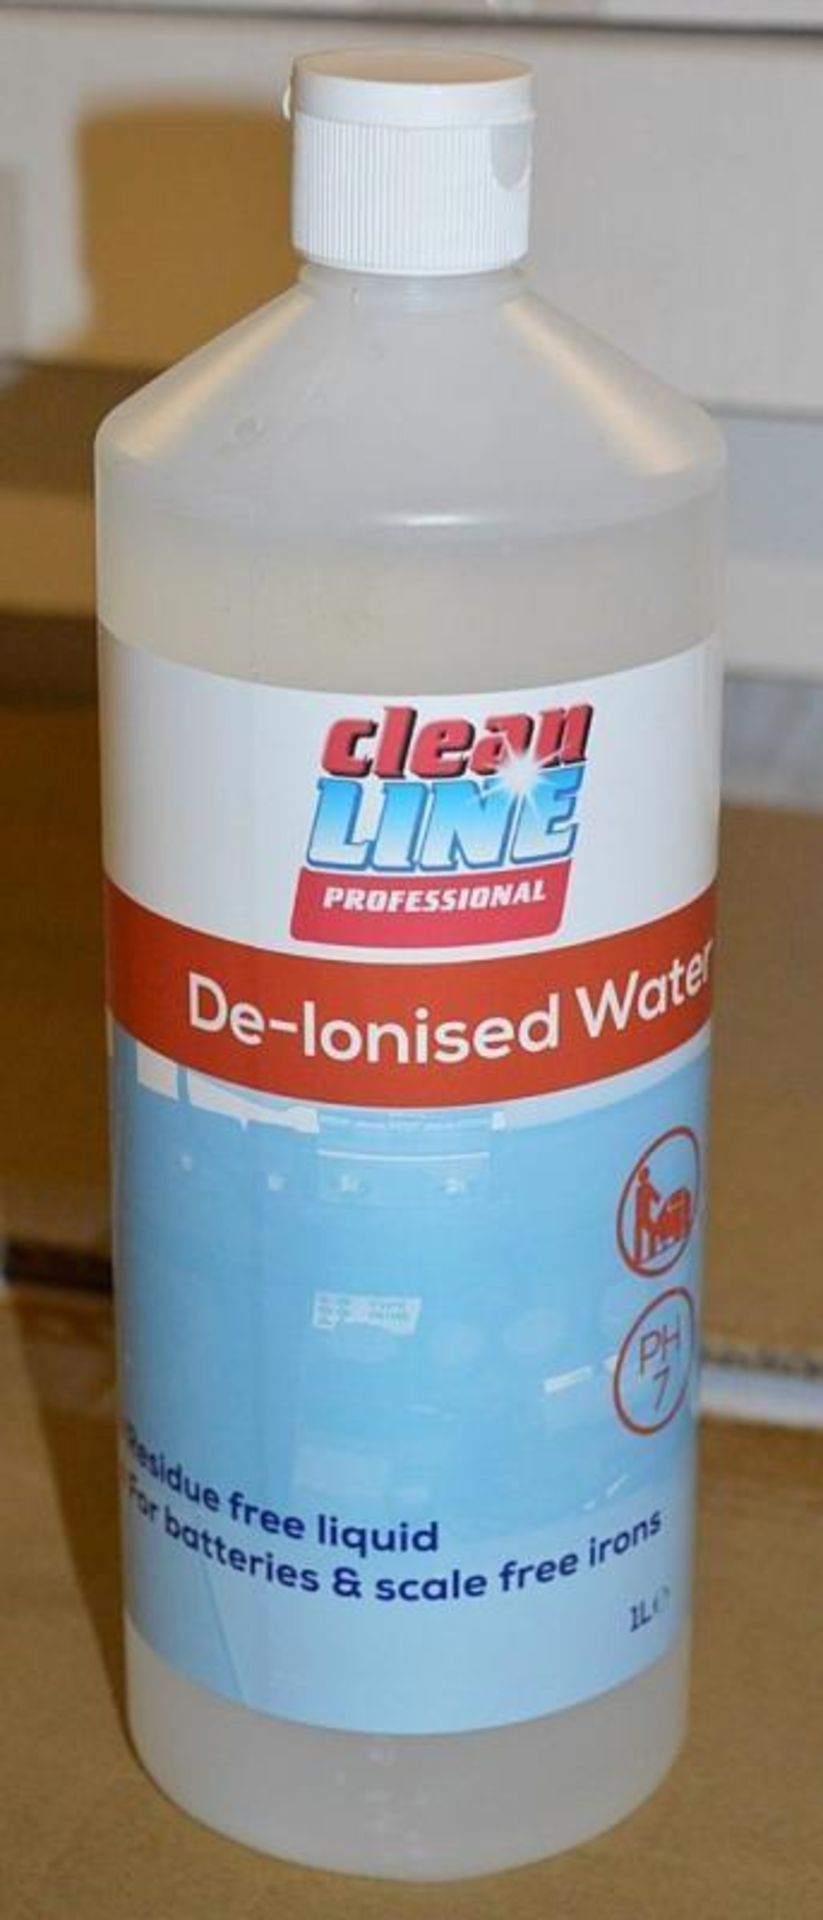 30 x 1-Litre Clean Line Professional Branded De-Ionised (Distilled) Water - New / Unused Stock - CL0